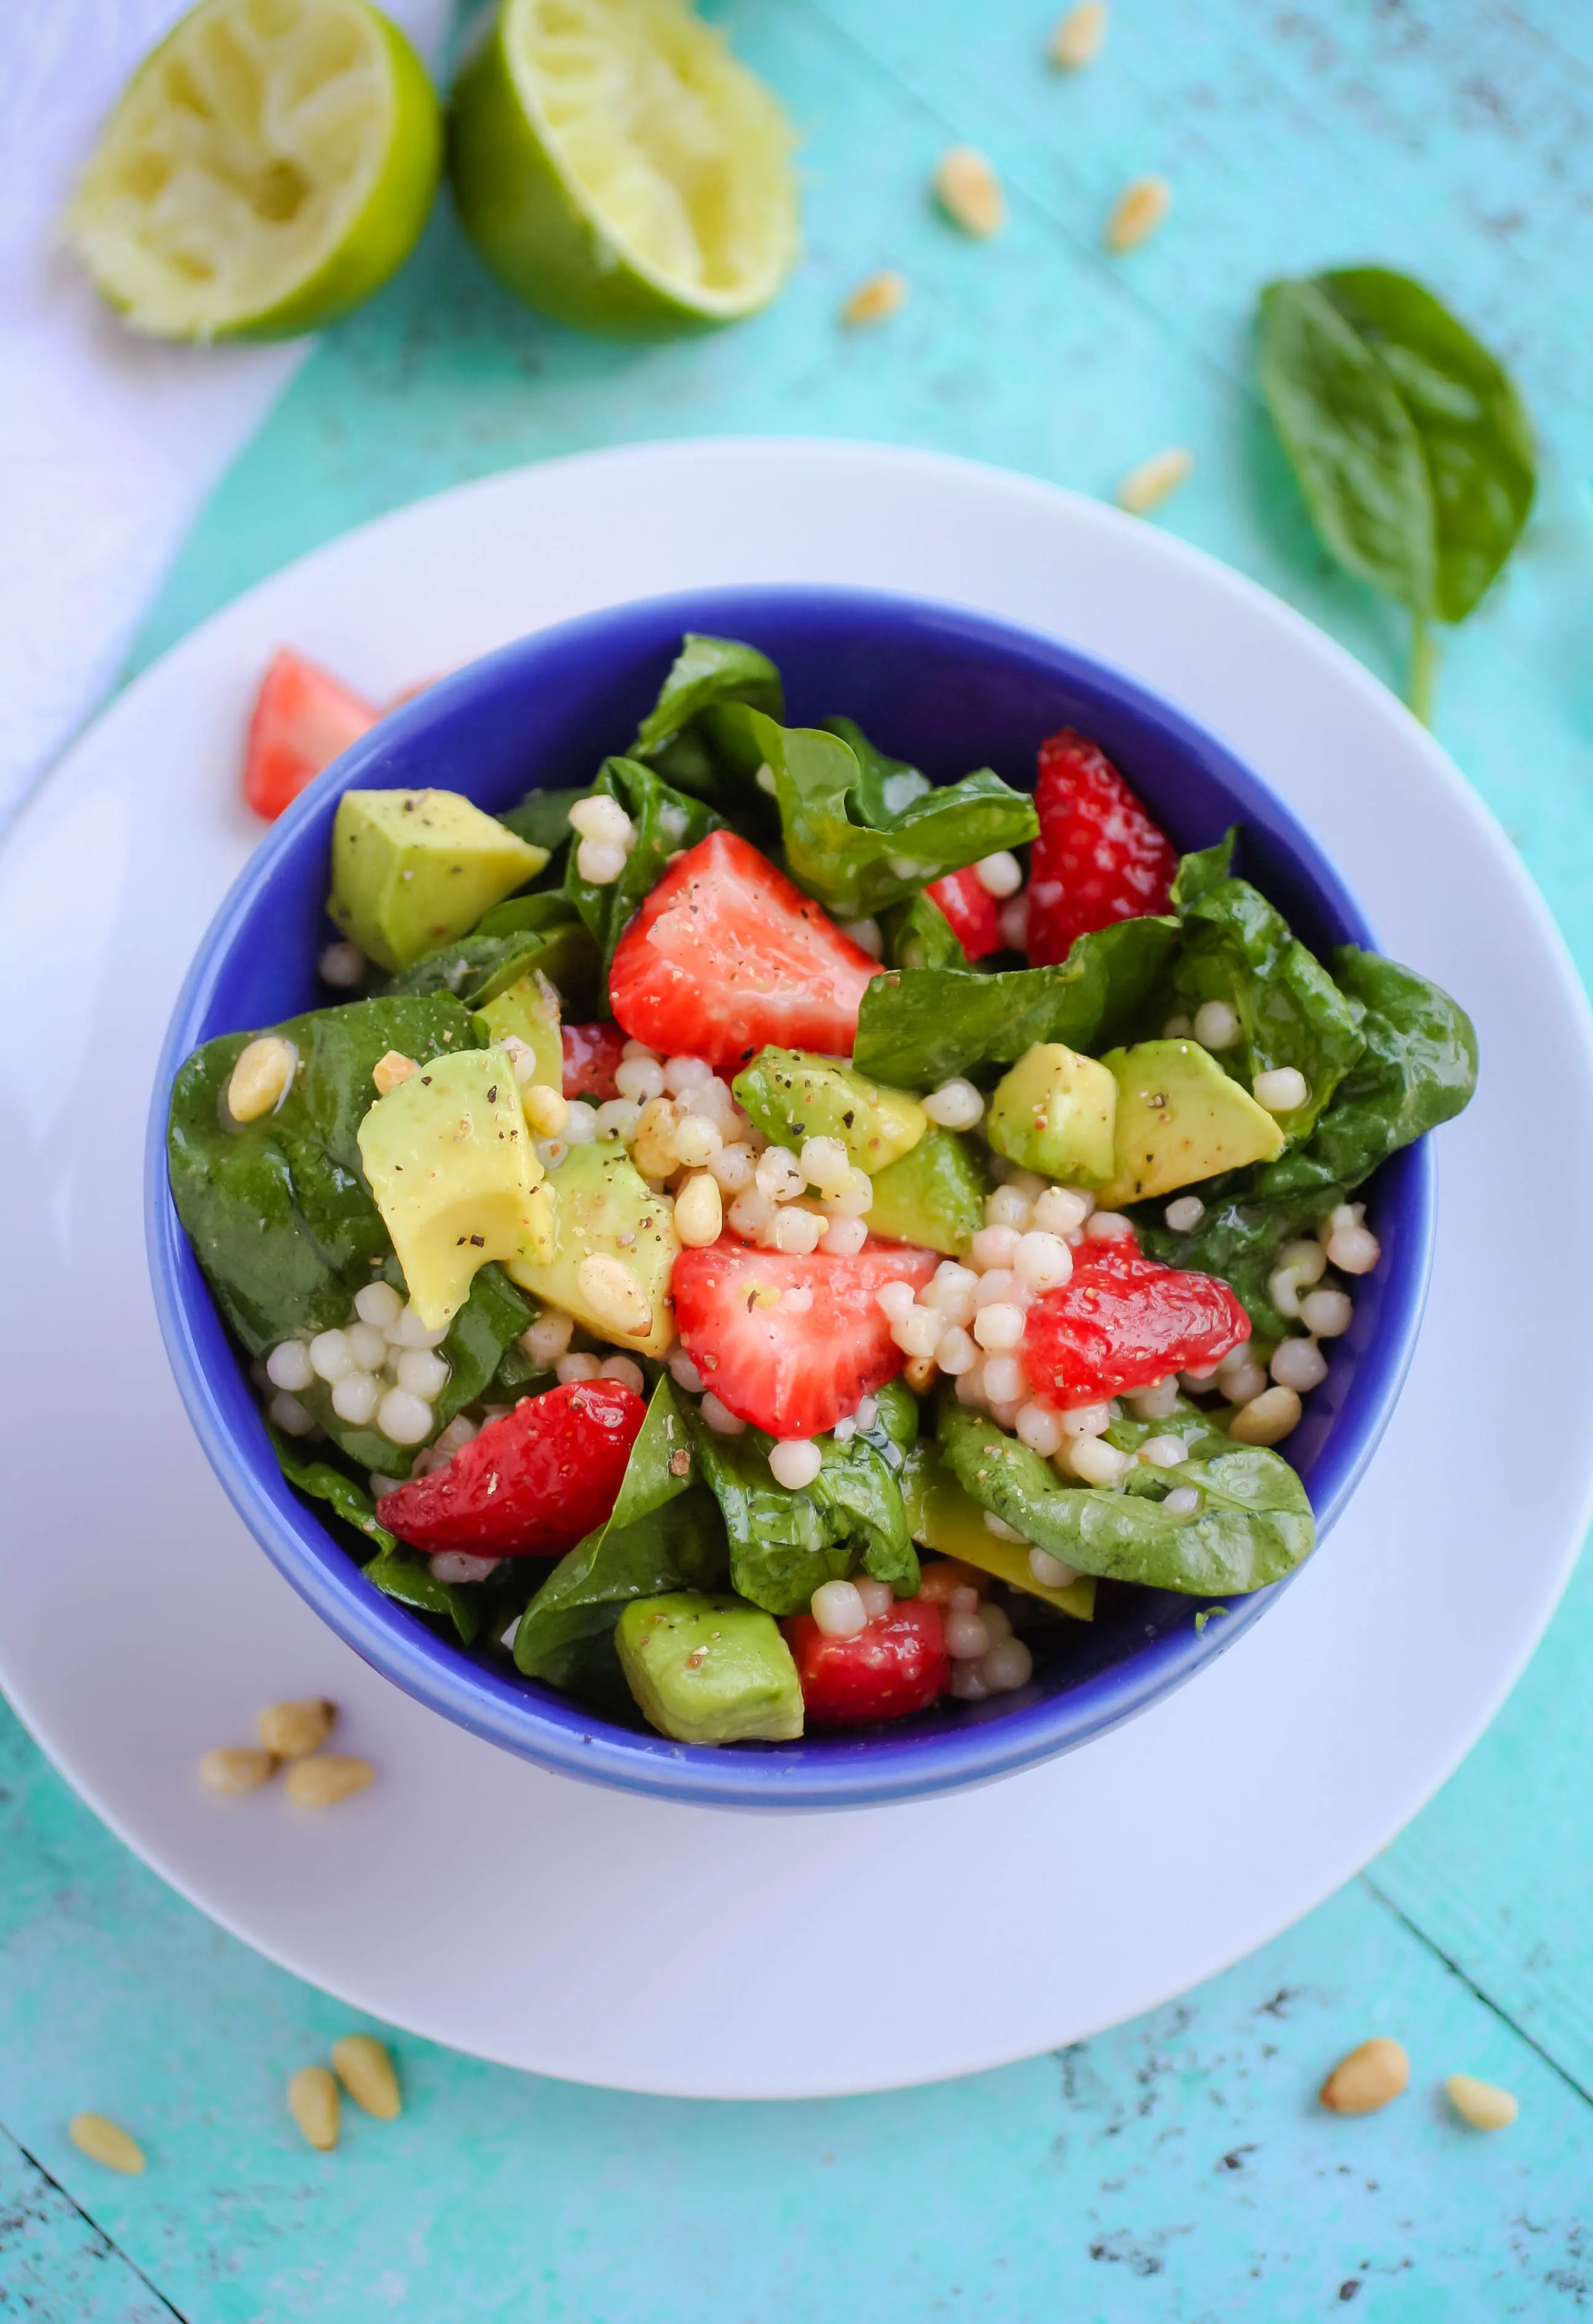 Spinach and Couscous Salad with Strawberries, Avocado & Honey-Lime Dressing is my new favorite summer salad. Spinach and Couscous Salad with Strawberries, Avocado & Honey-Lime Dressing is full of flavor and color!